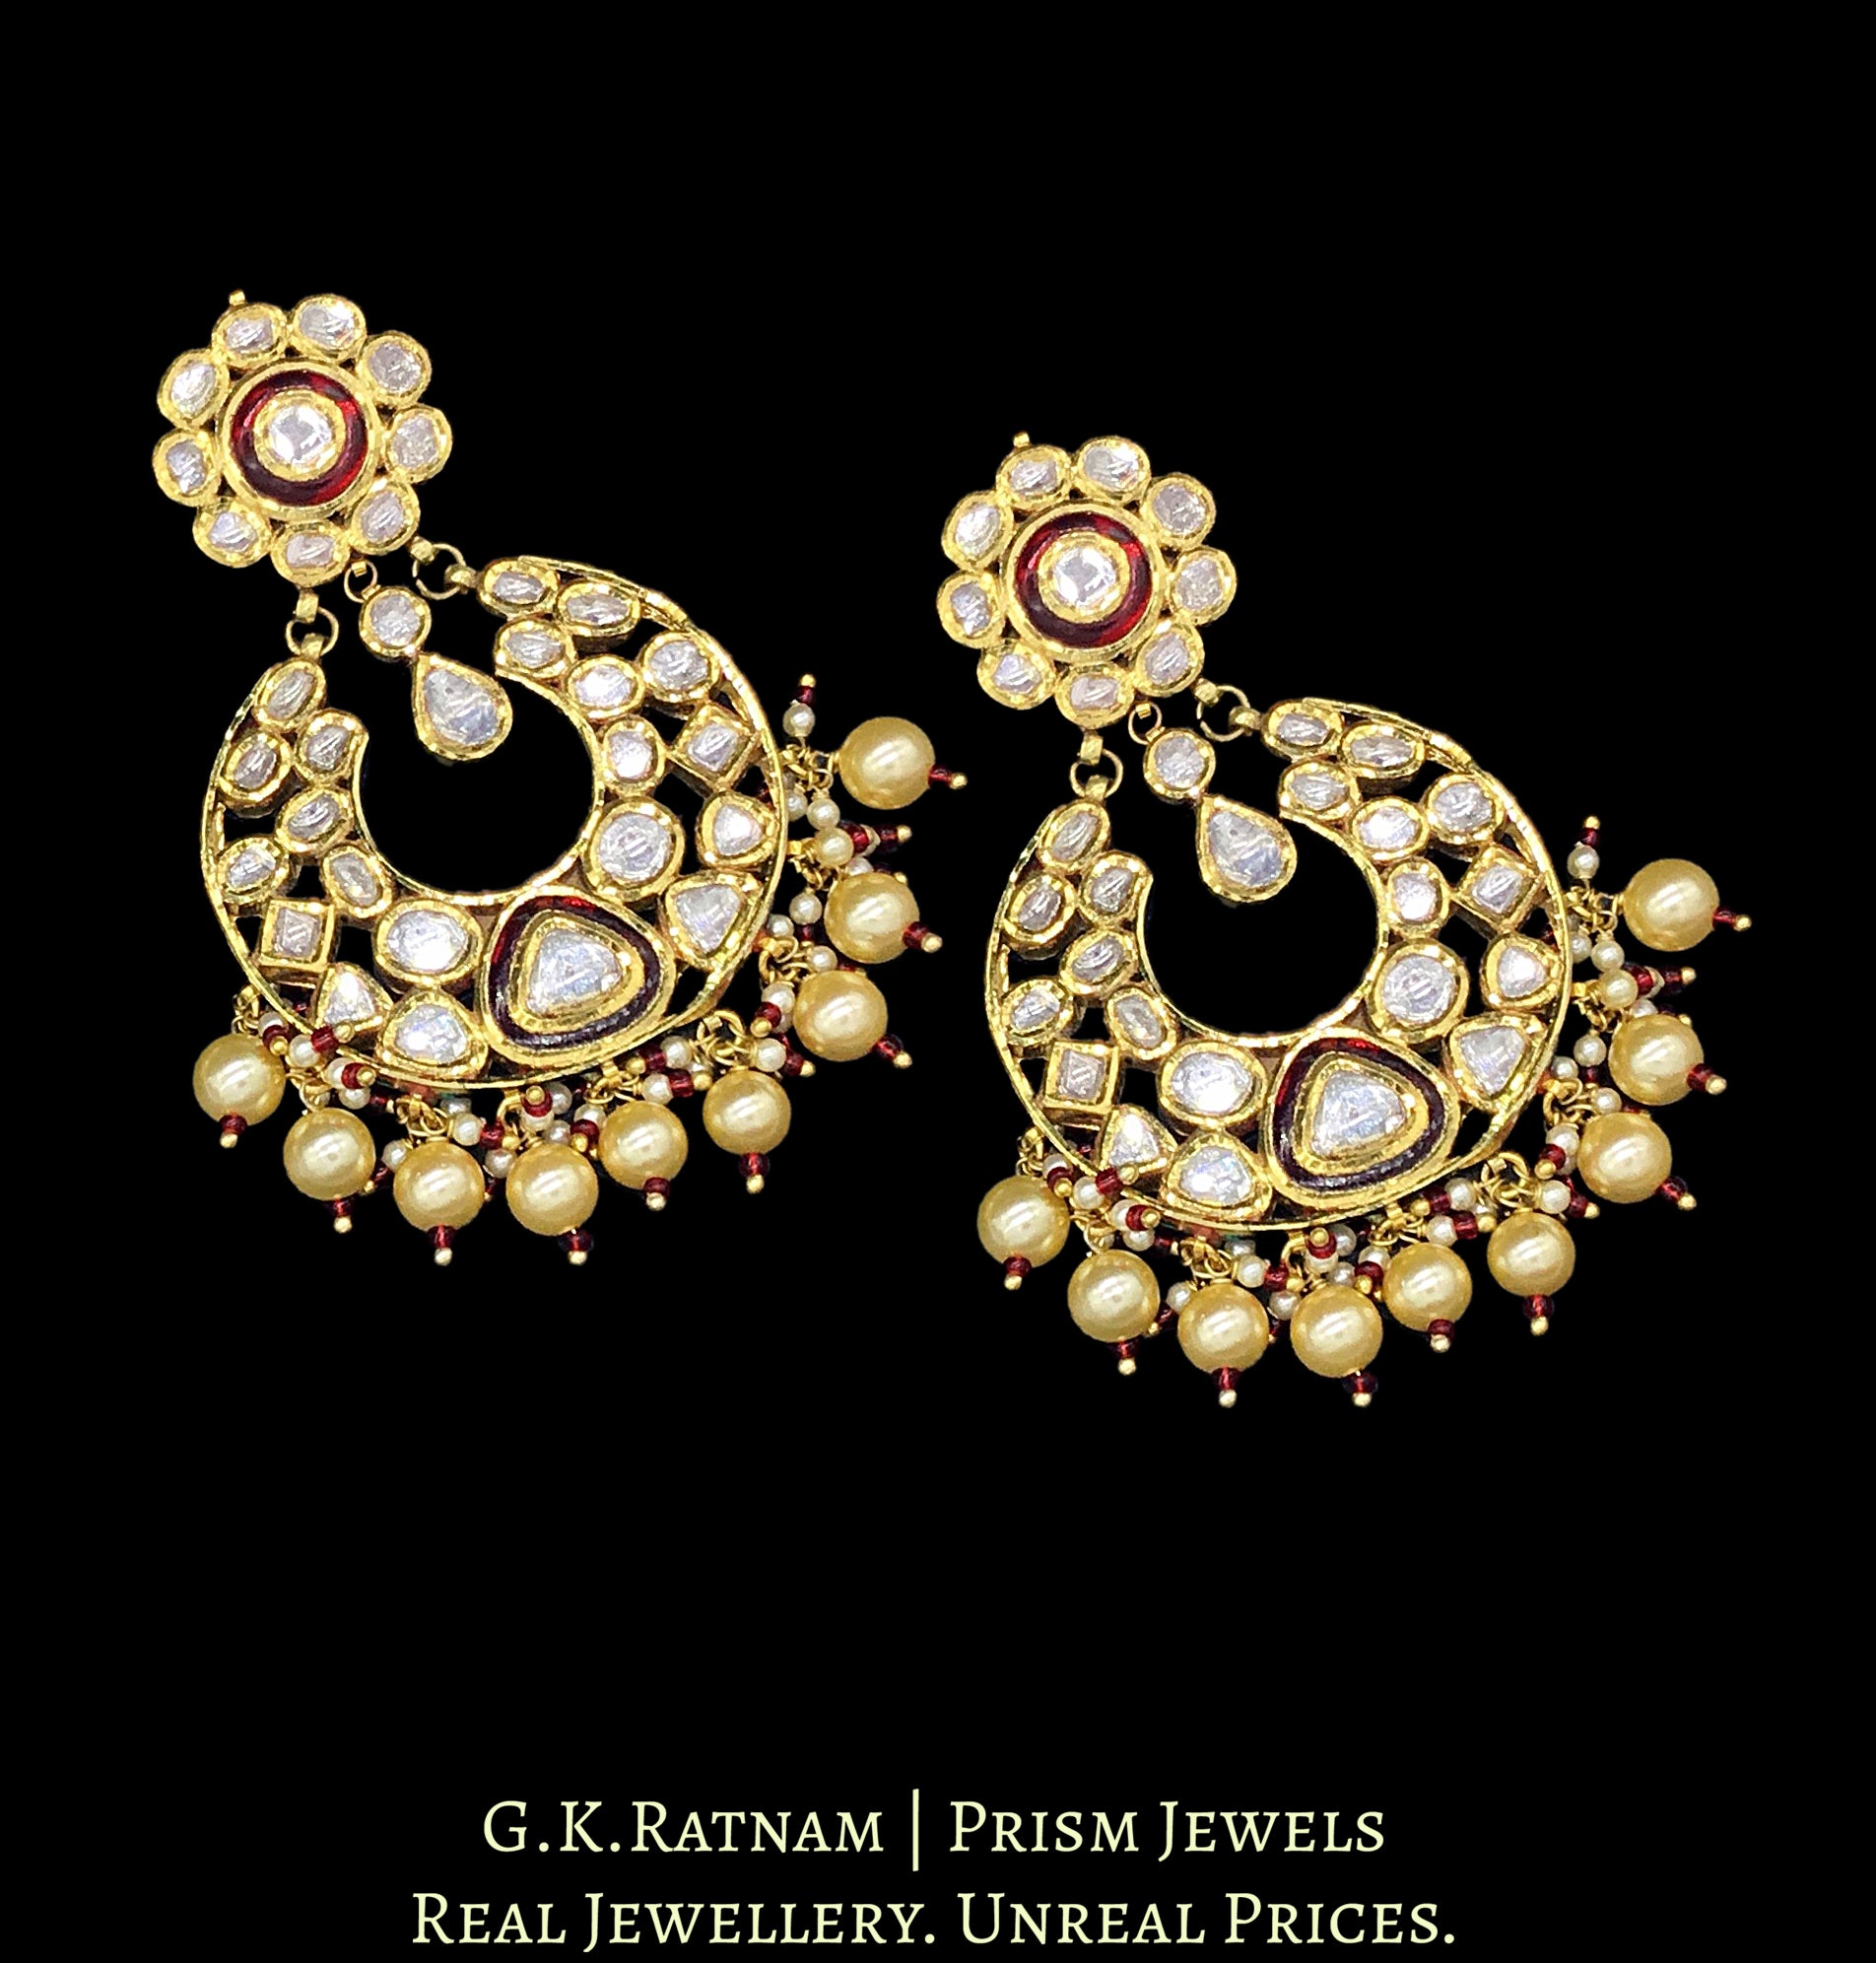 Traditional Gold and Diamond Polki Chand Bali Earring Pair with rubies and pearls strung with a hint of red